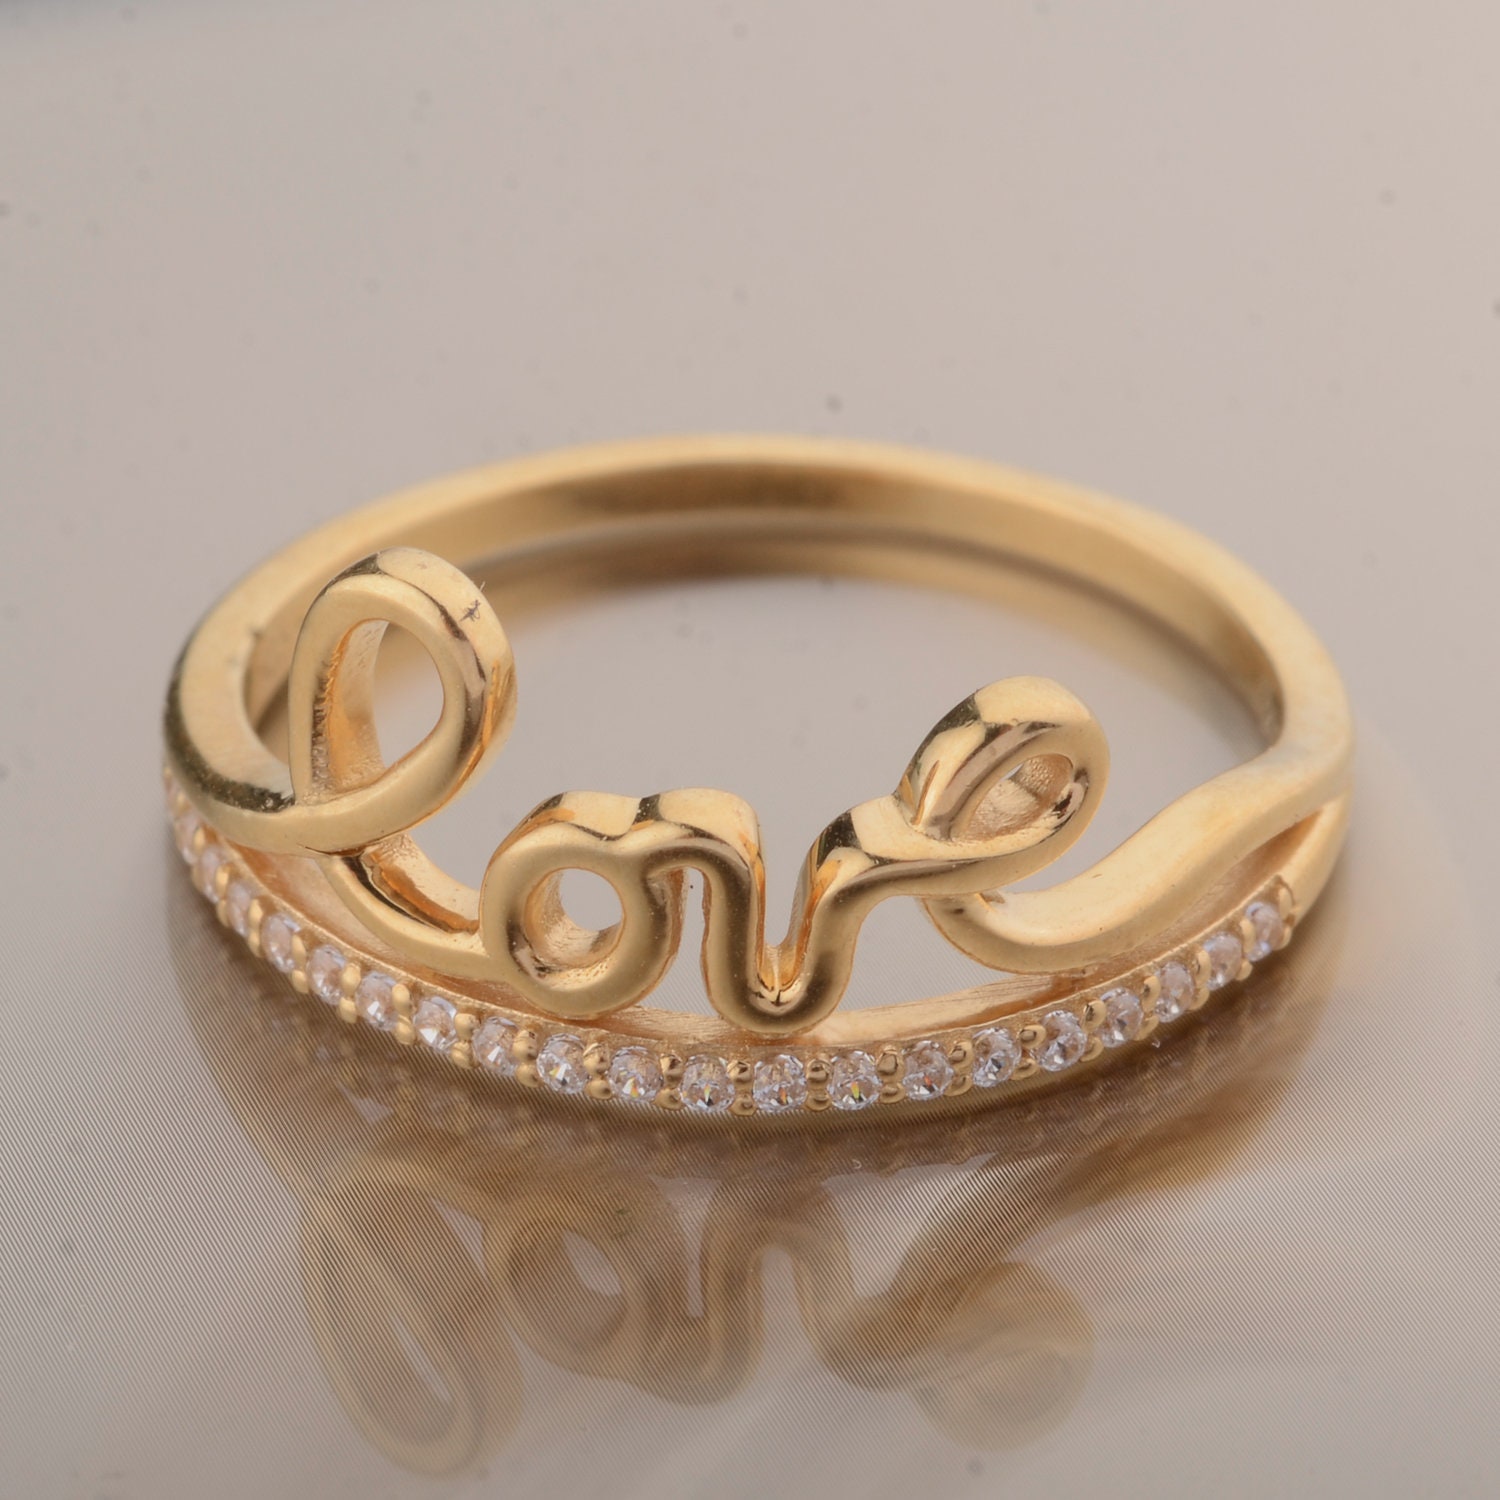 Buy quality 925 Silver Love Design Ring in Ahmedabad